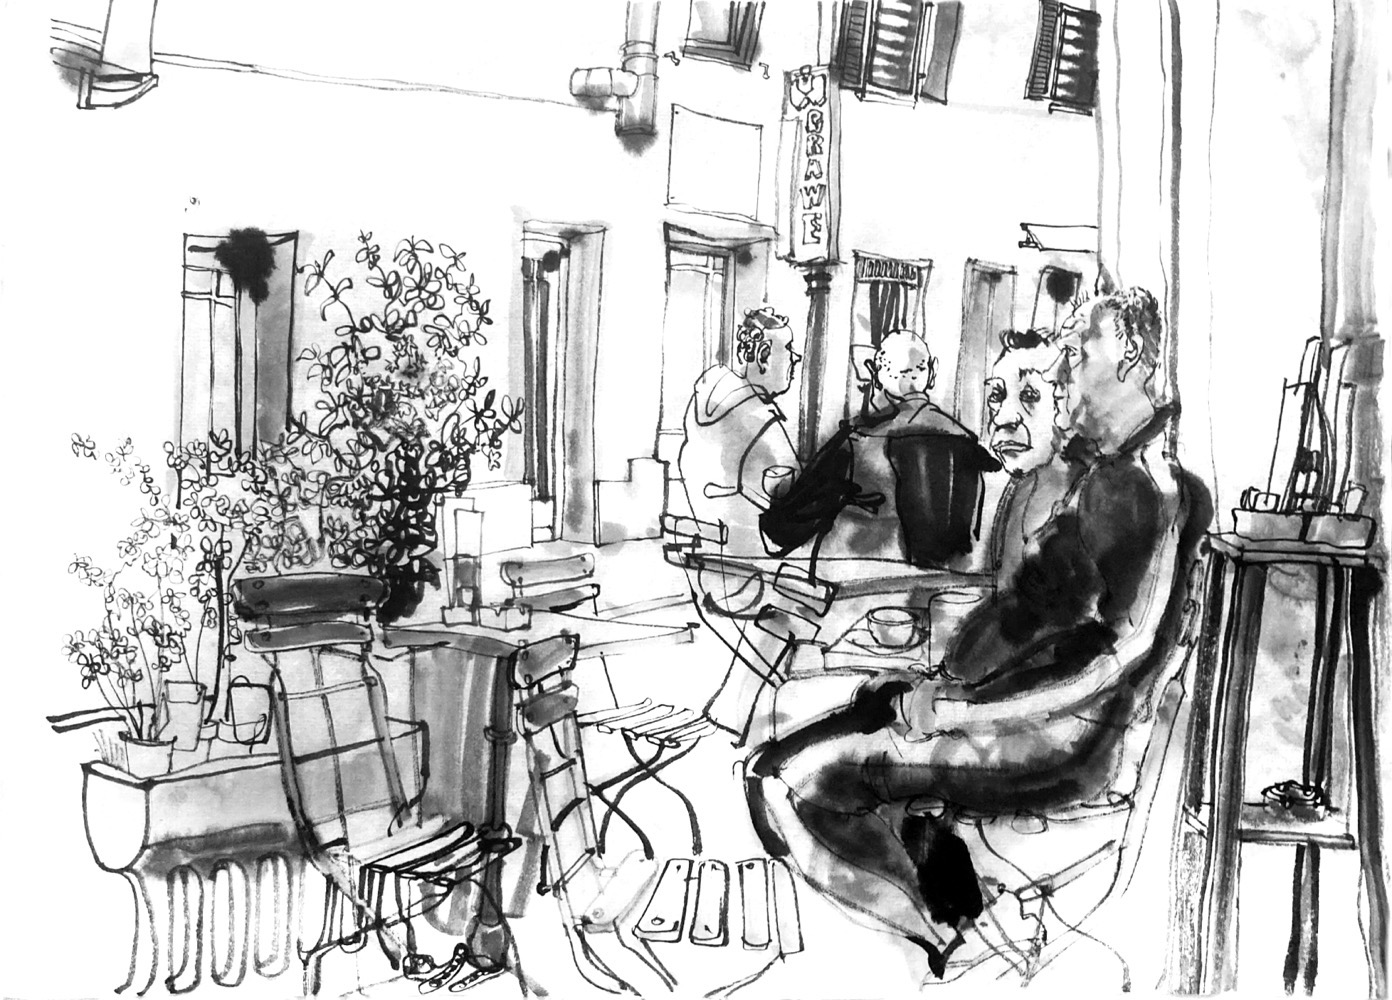 Ink drawing of guests in front of a café/bar